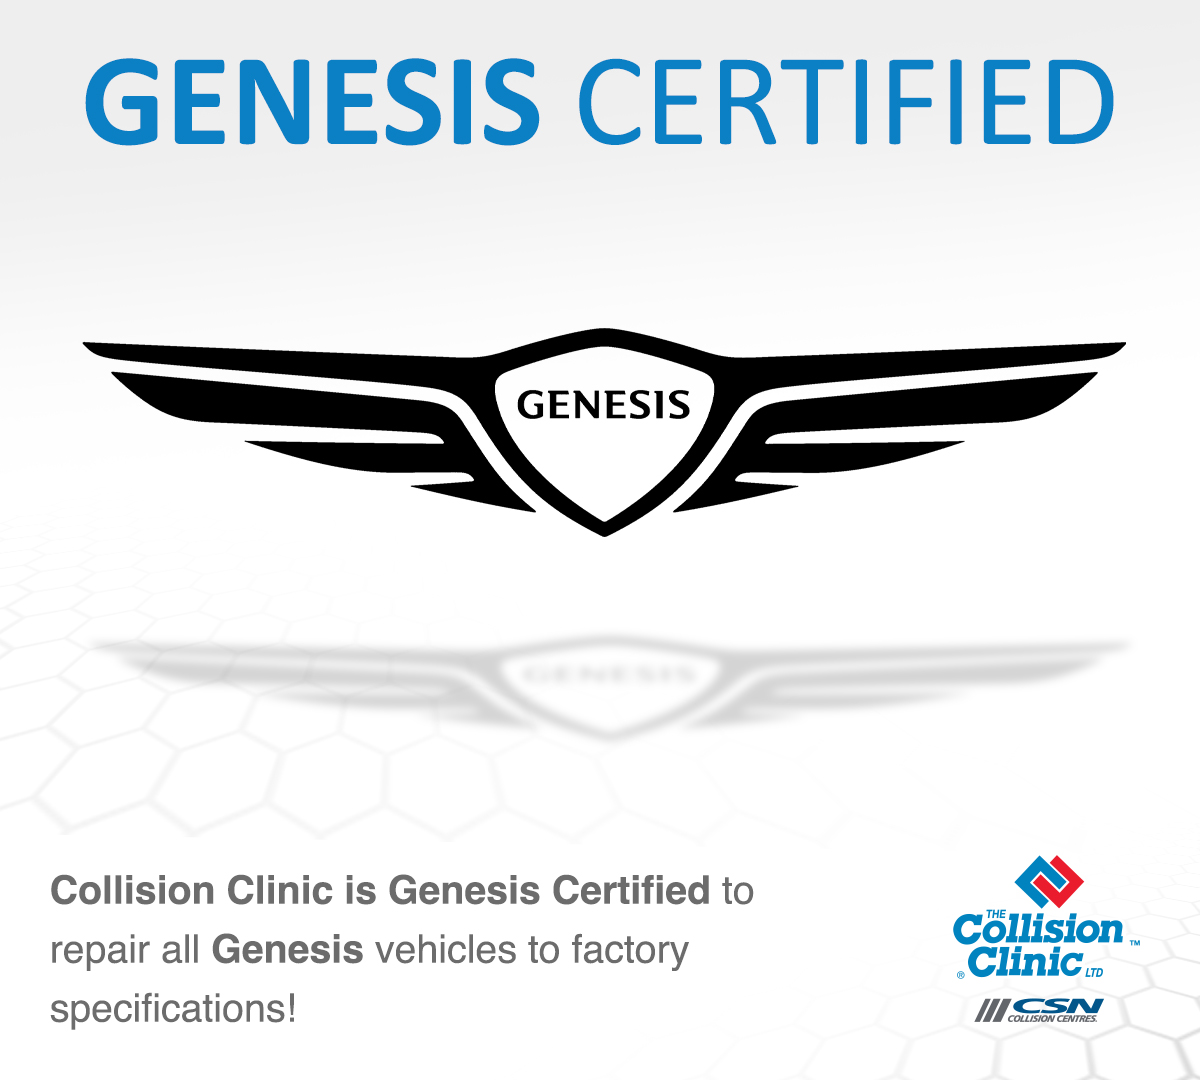 We're GENESIS Certified! 

Collision Clinic CSN – customer preferred for all makes and models, on Topsail Road and Torbay Road!

Genesis Canada 
#RightToChoose #MostCertified #ThatsCollisionClinic #GENESISCertified